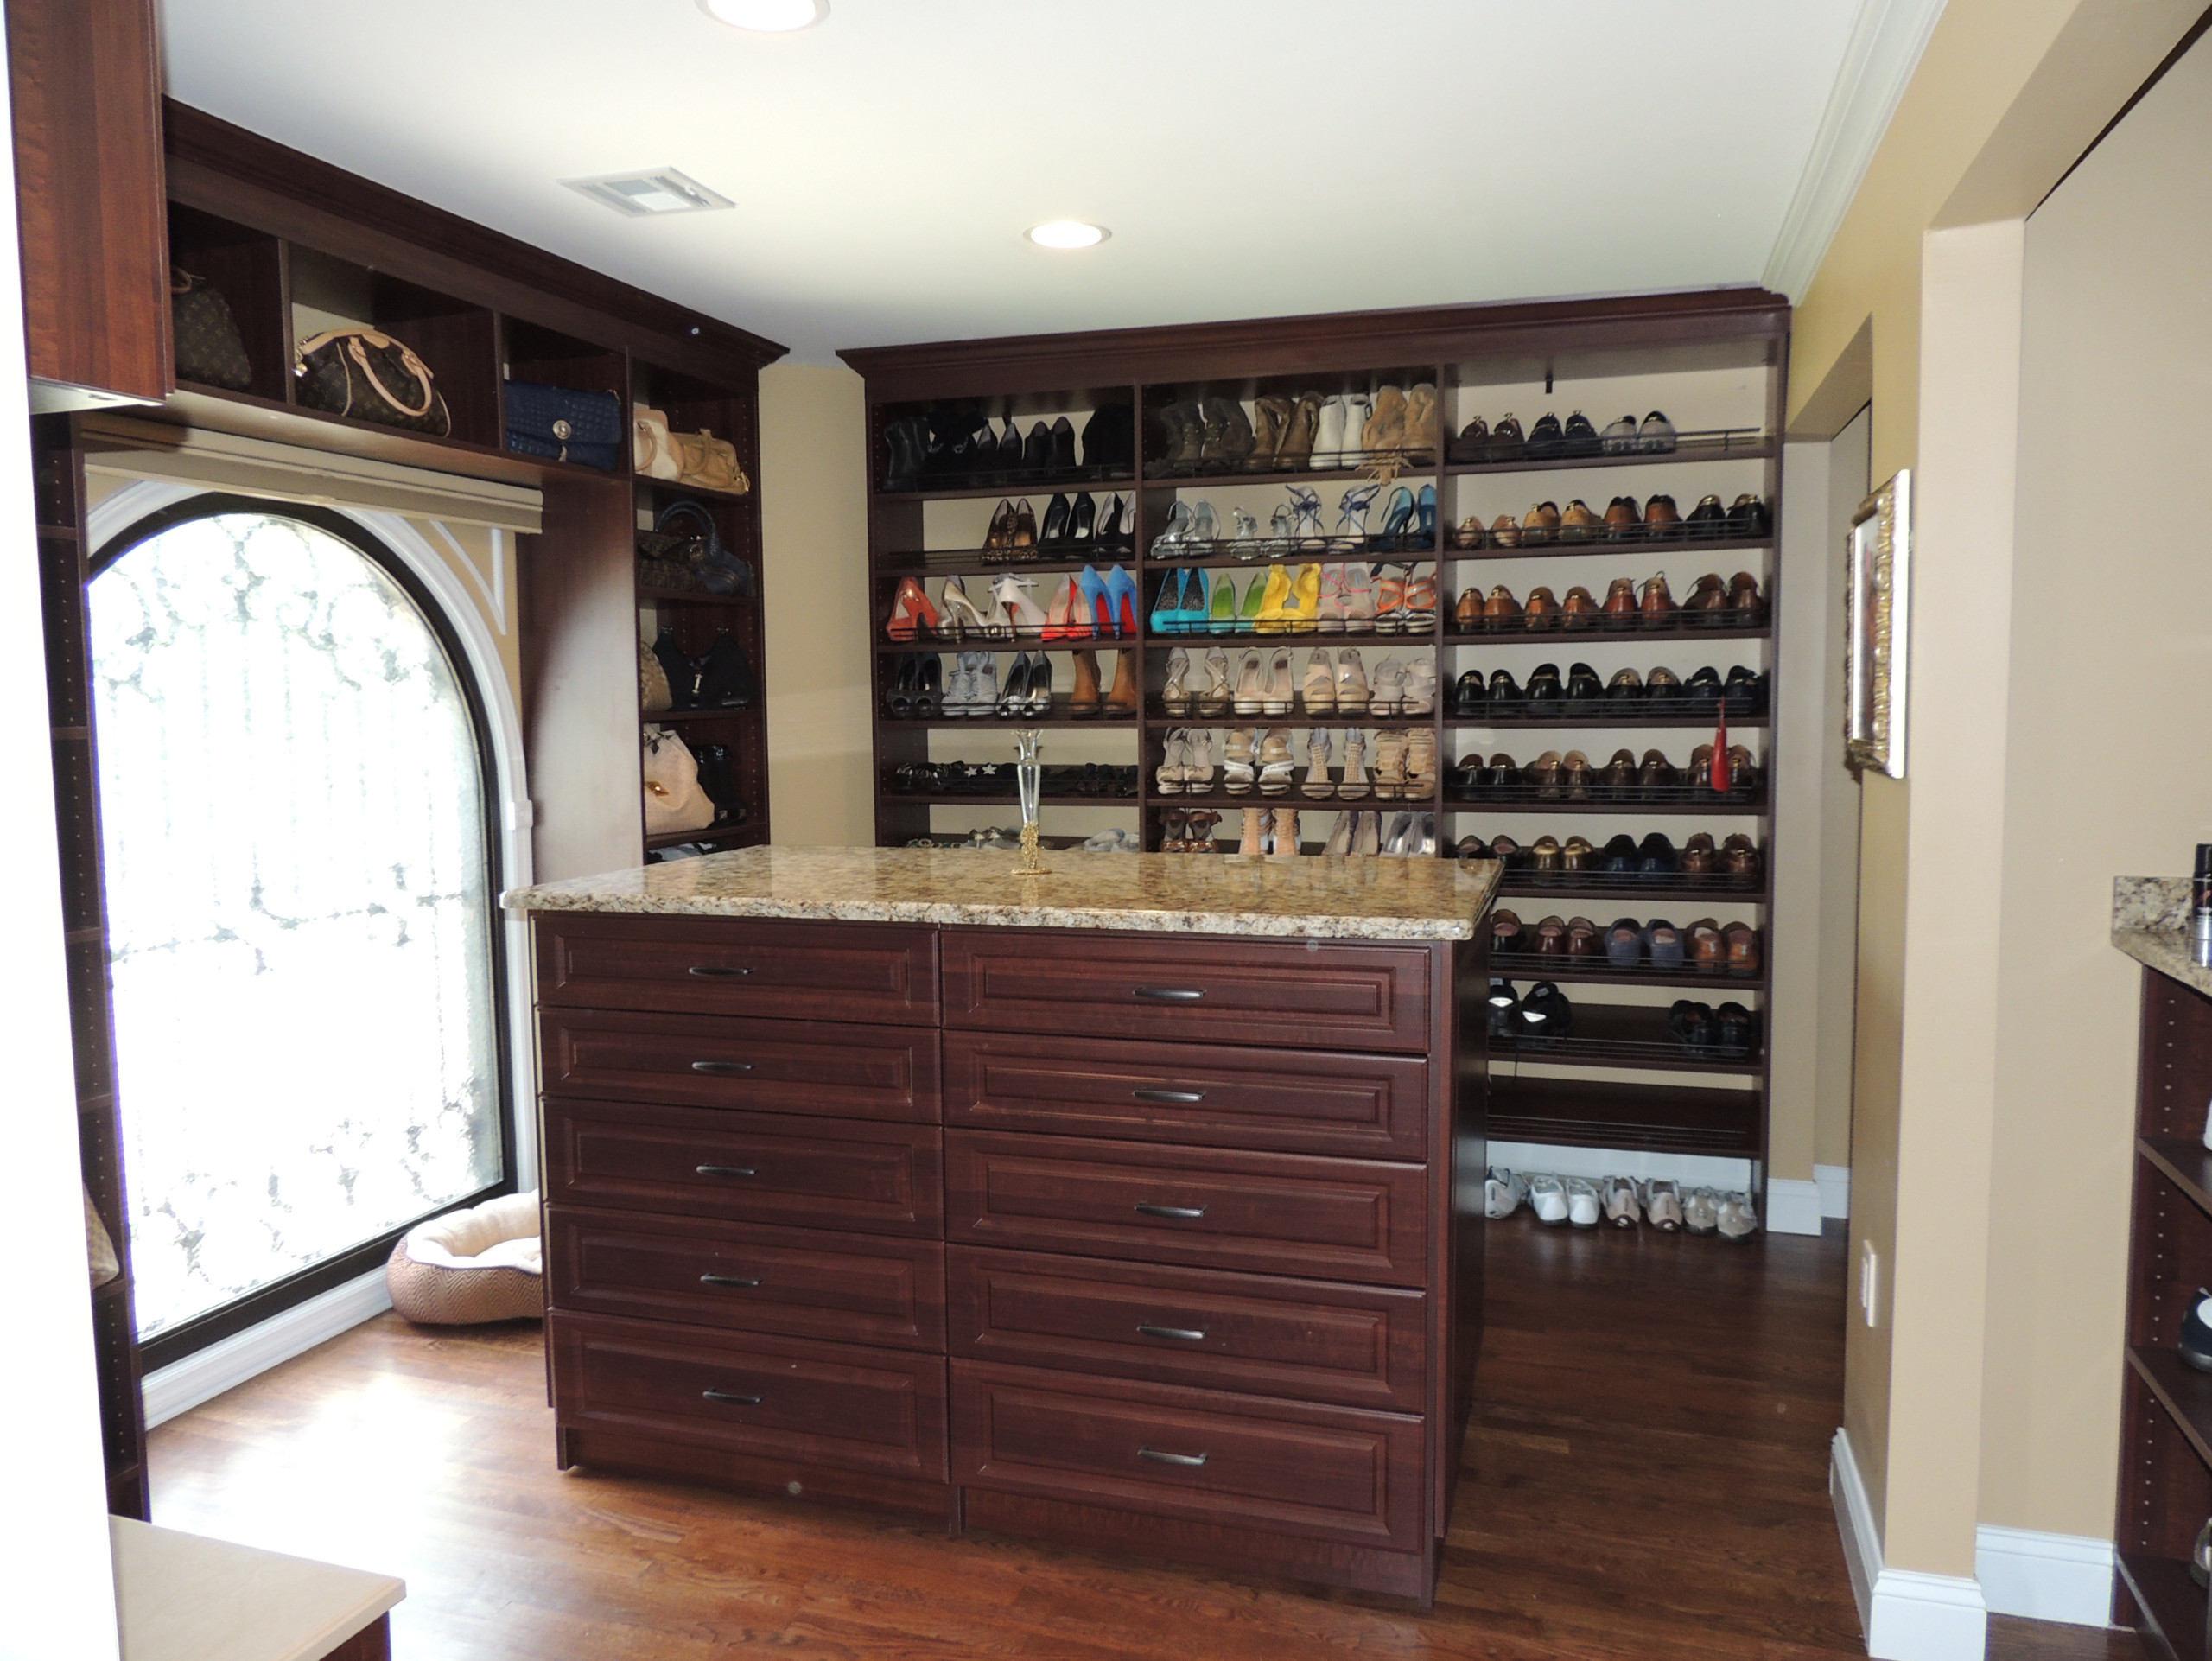 Closet has a large window and the clients wanted to have shelving to go around the window.  There is a large island with twenty drawers.  All the drawers have custom jewelry, tie and dividers.  There